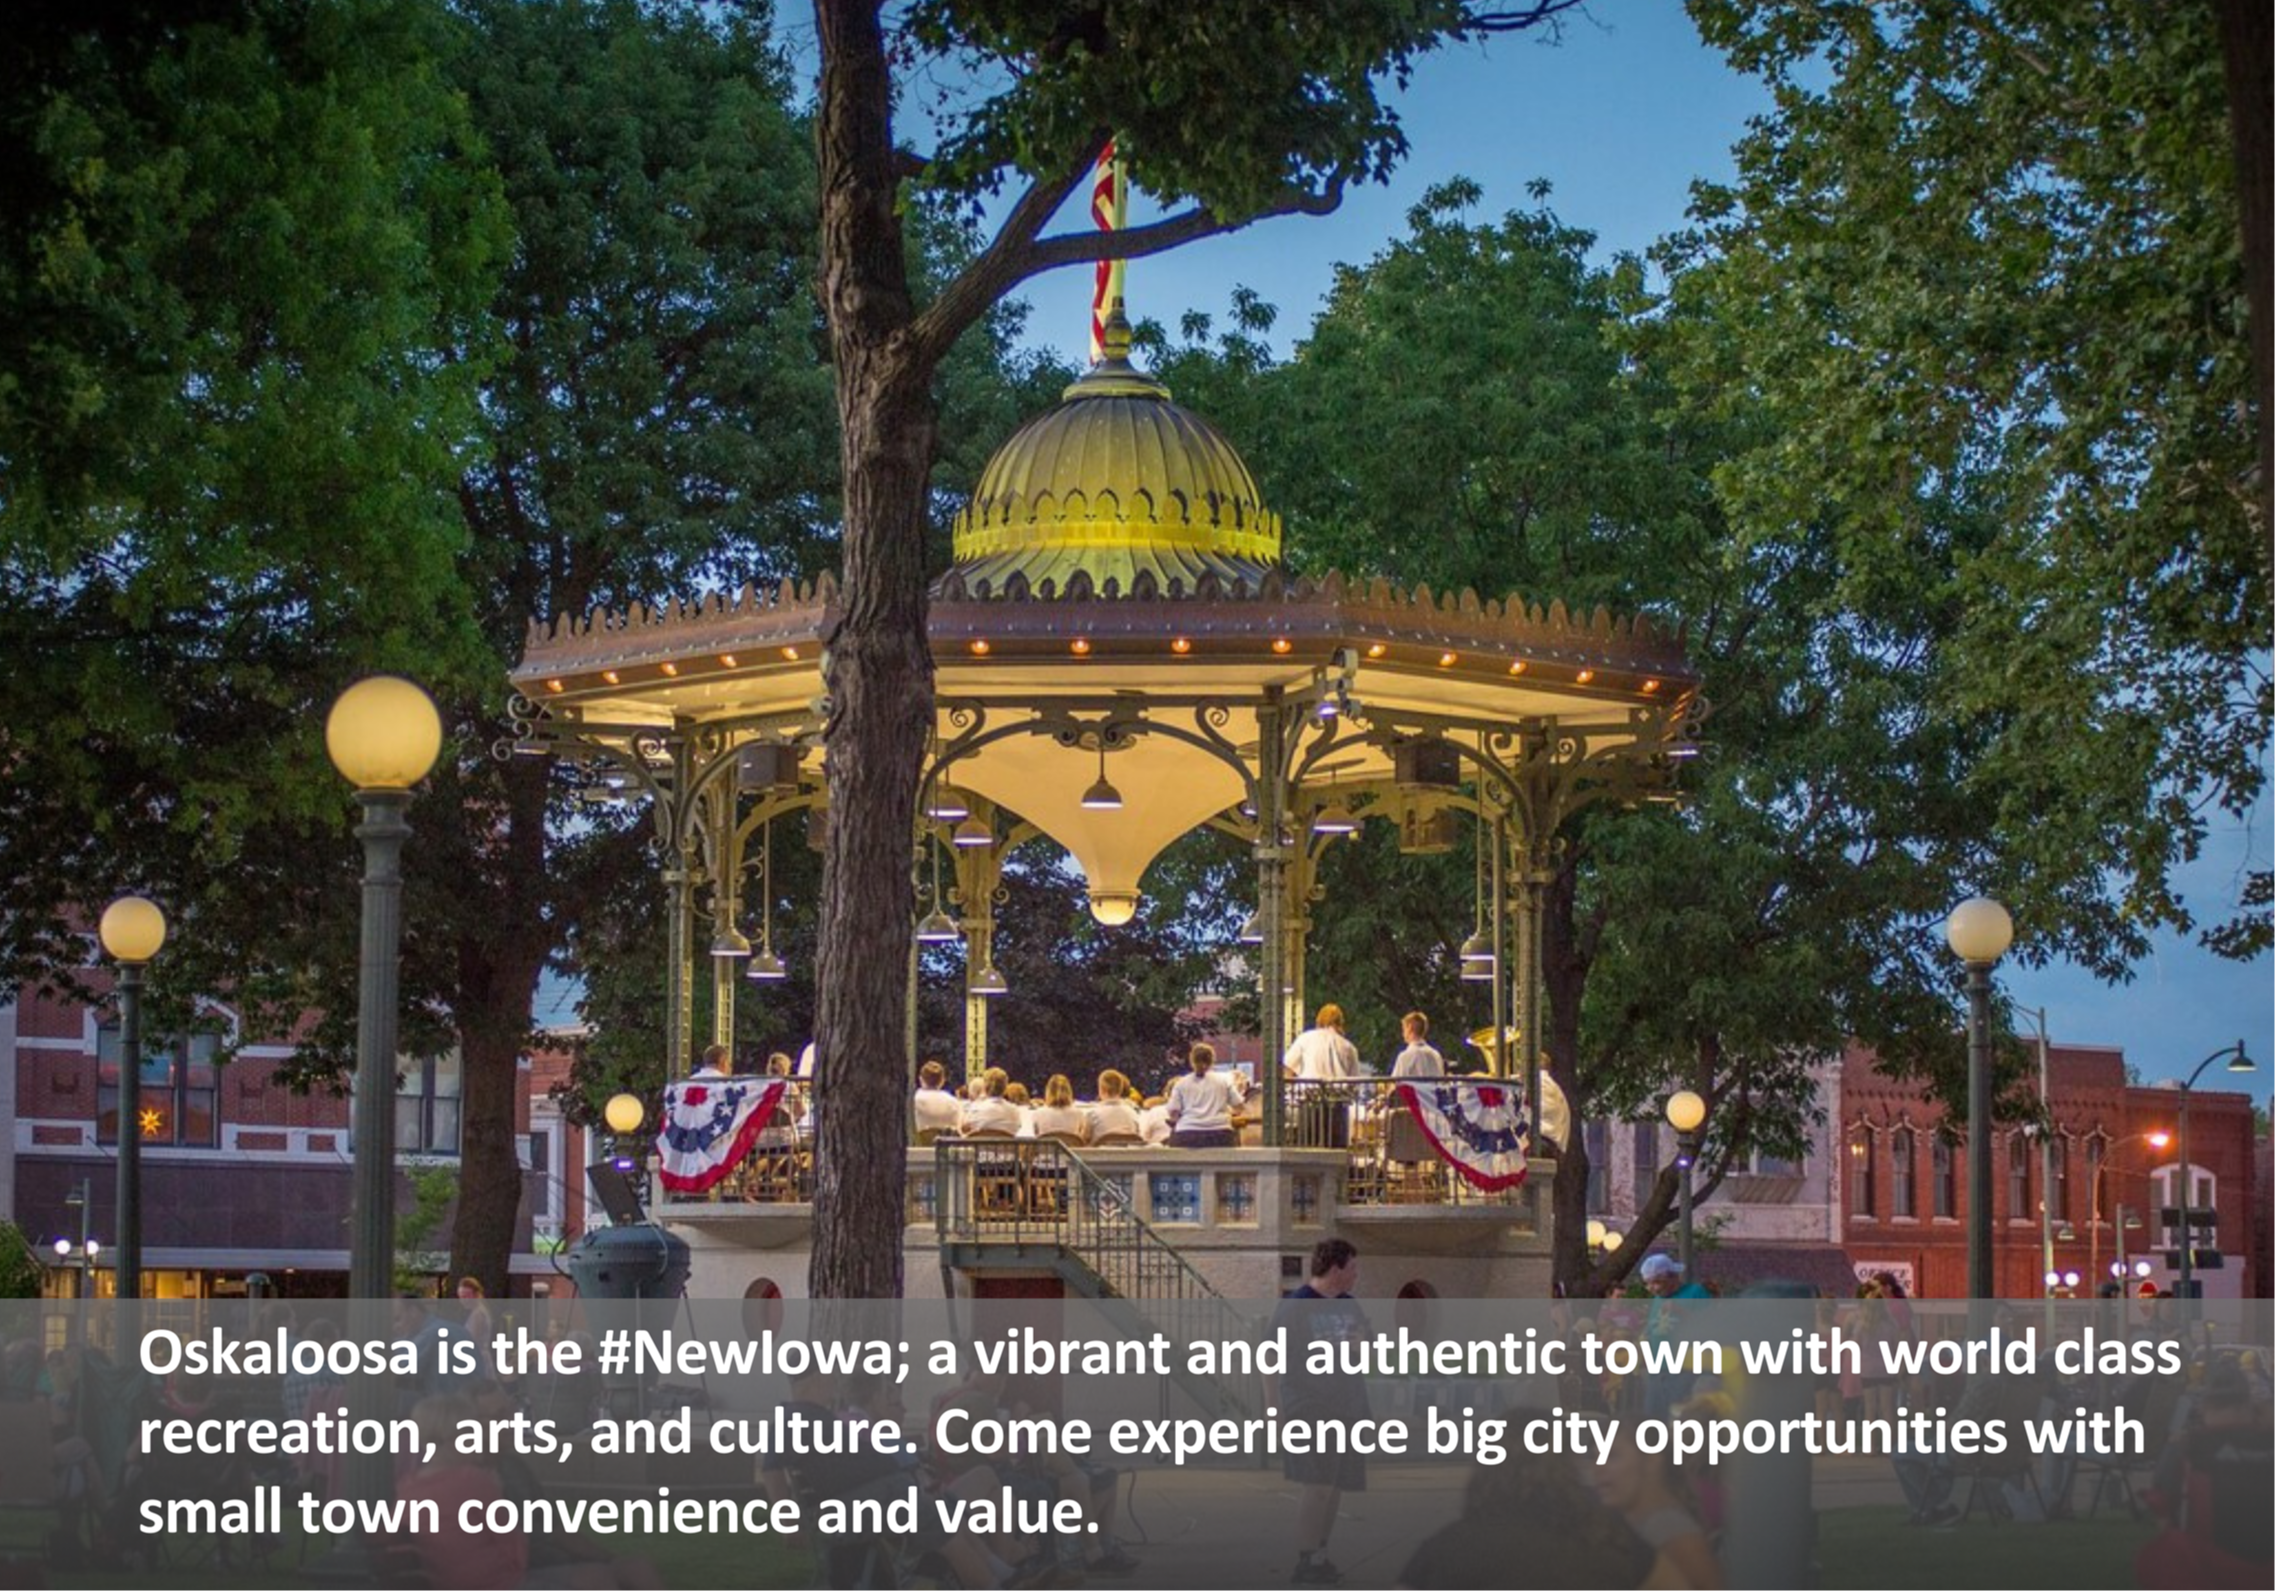 Oskaloosa is the #NewIowa; a vibrant and authentic town with world class recreation, arts, and culture. Come experience big city opportunities with small town convenience and value.